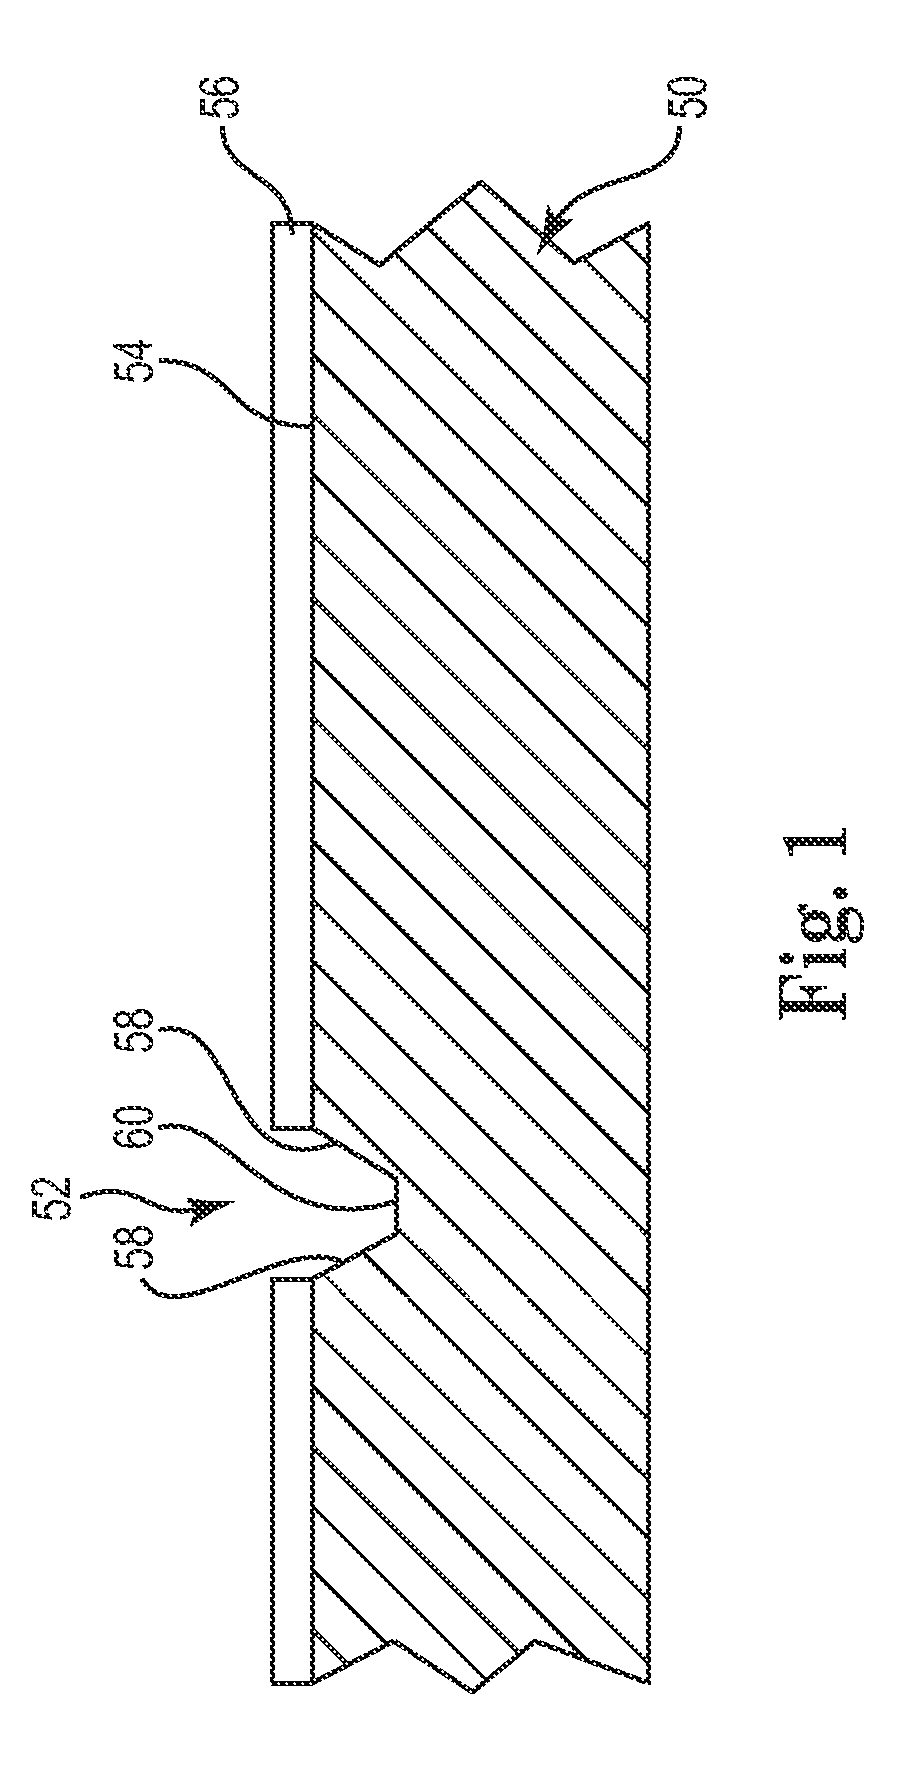 Method of making a compliant printed circuit peripheral lead semiconductor test socket